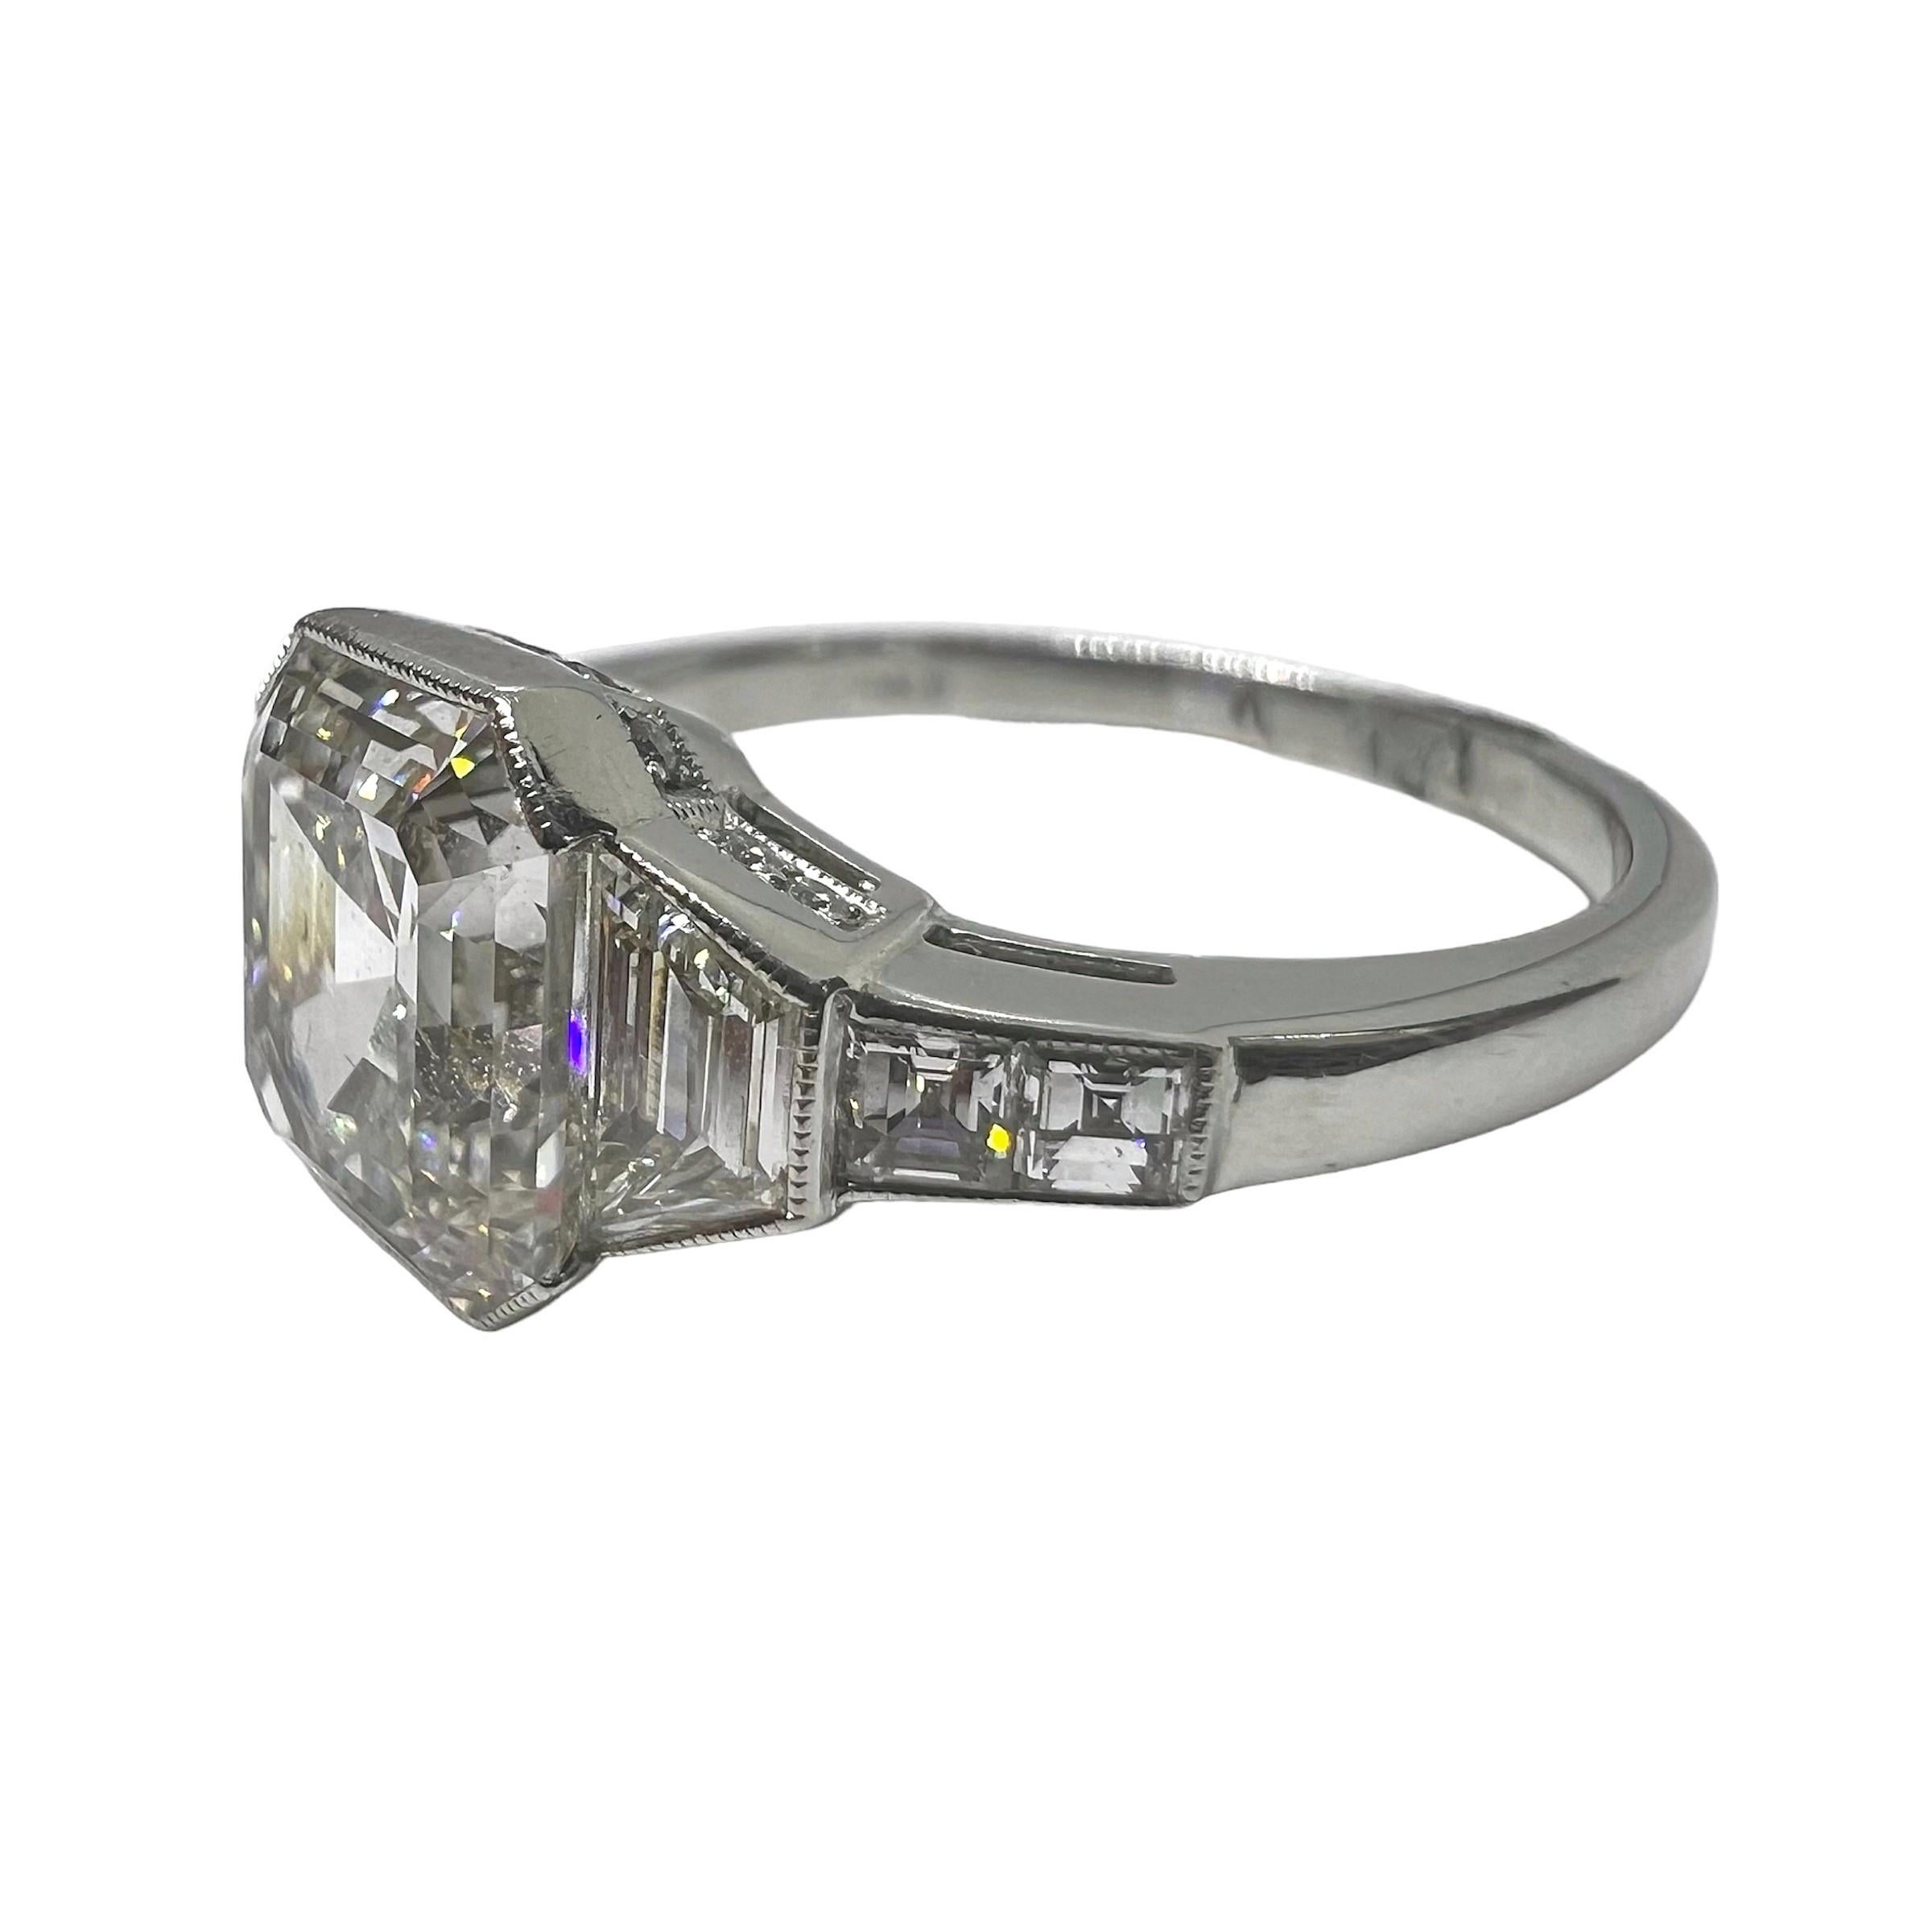 This engagement platinum ring has a center stone that weighs a total of 3.01 carat. Surrounded and accentuated with baguette cut and square diamonds that is approximately 0.73 carats.

Sophia D by Joseph Dardashti LTD has been known worldwide for 35